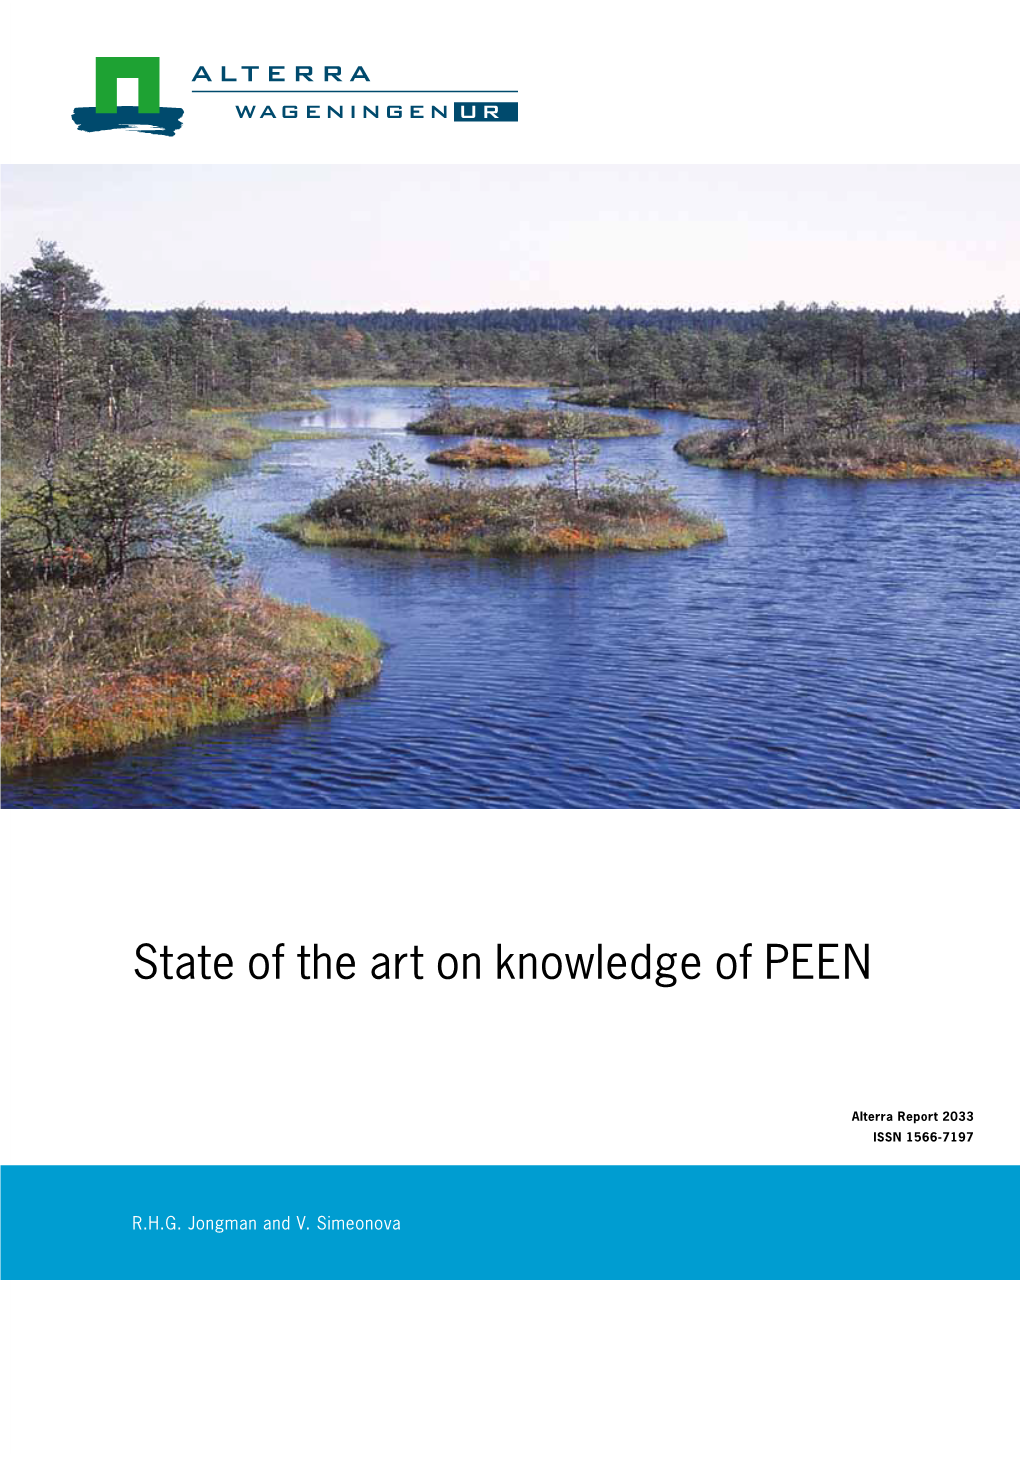 State of the Art on Knowledge of PEEN Wageningen Approach